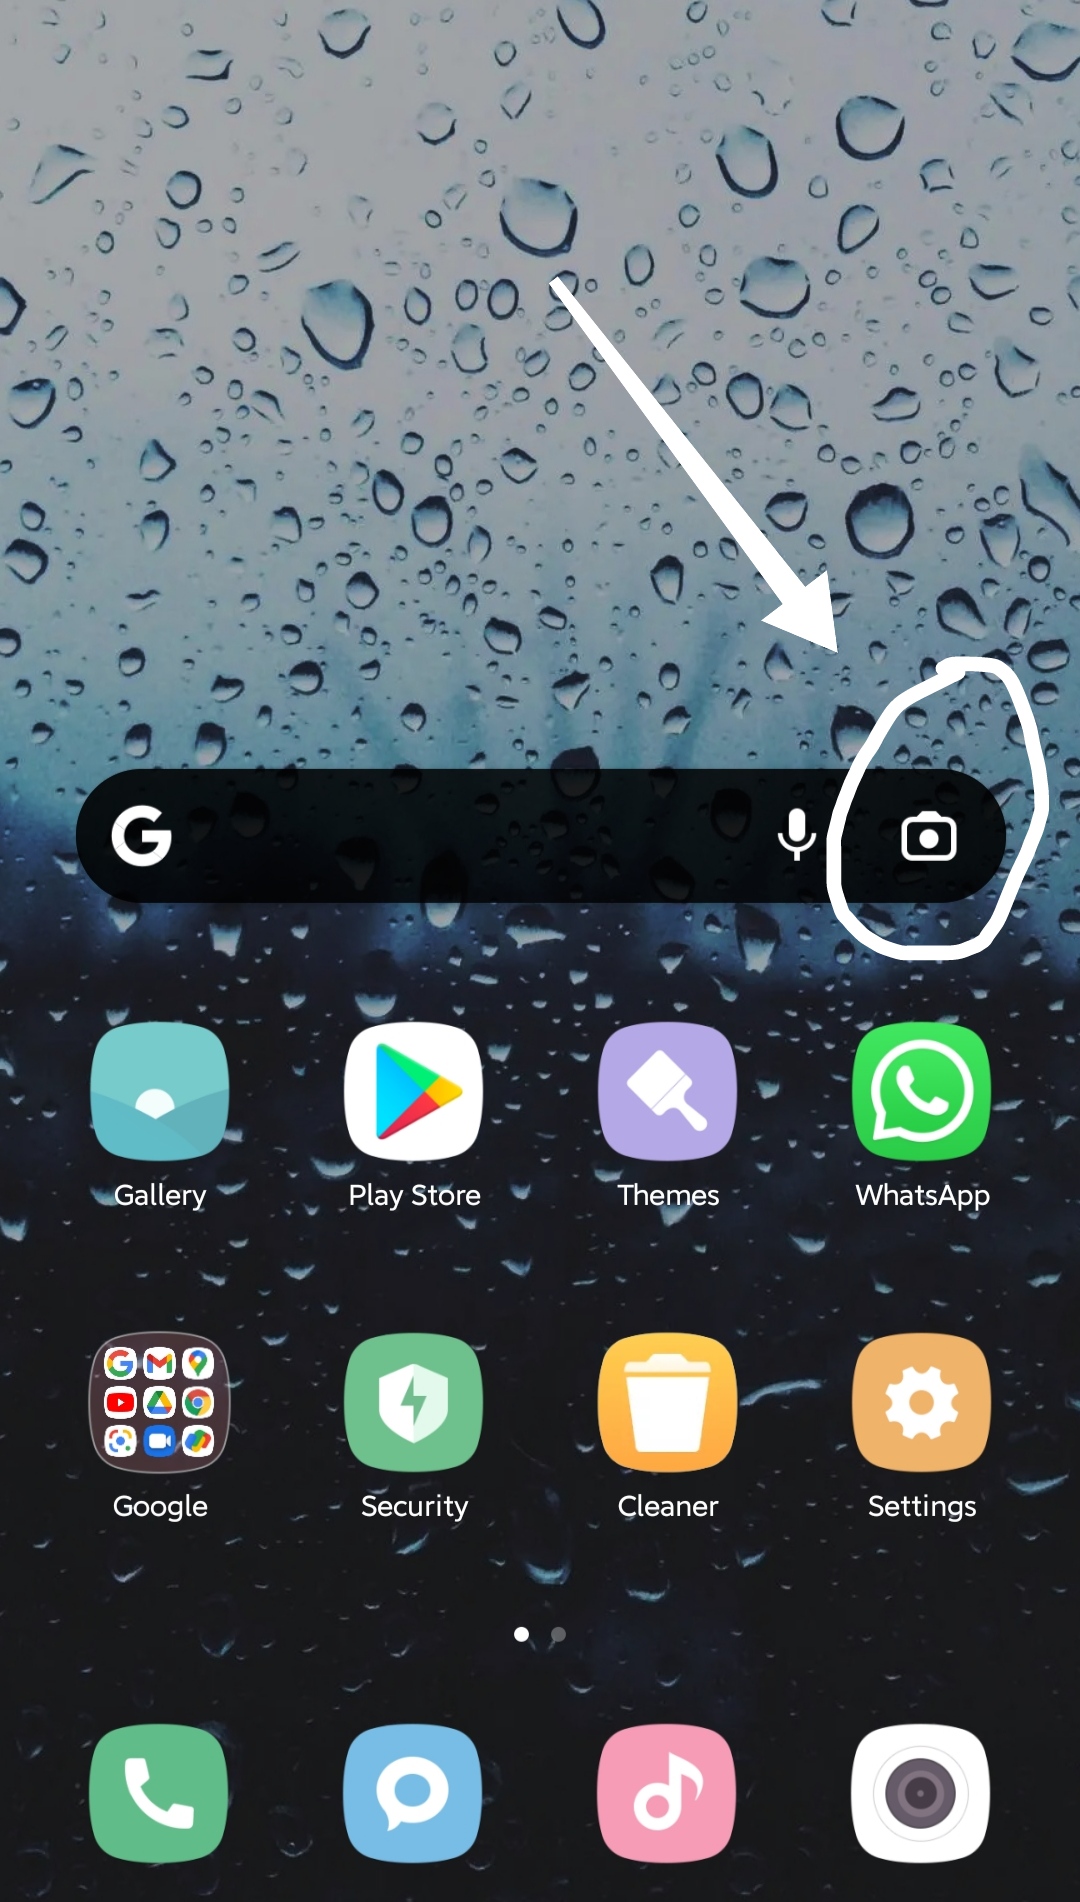 Is there a Google Lens widget?